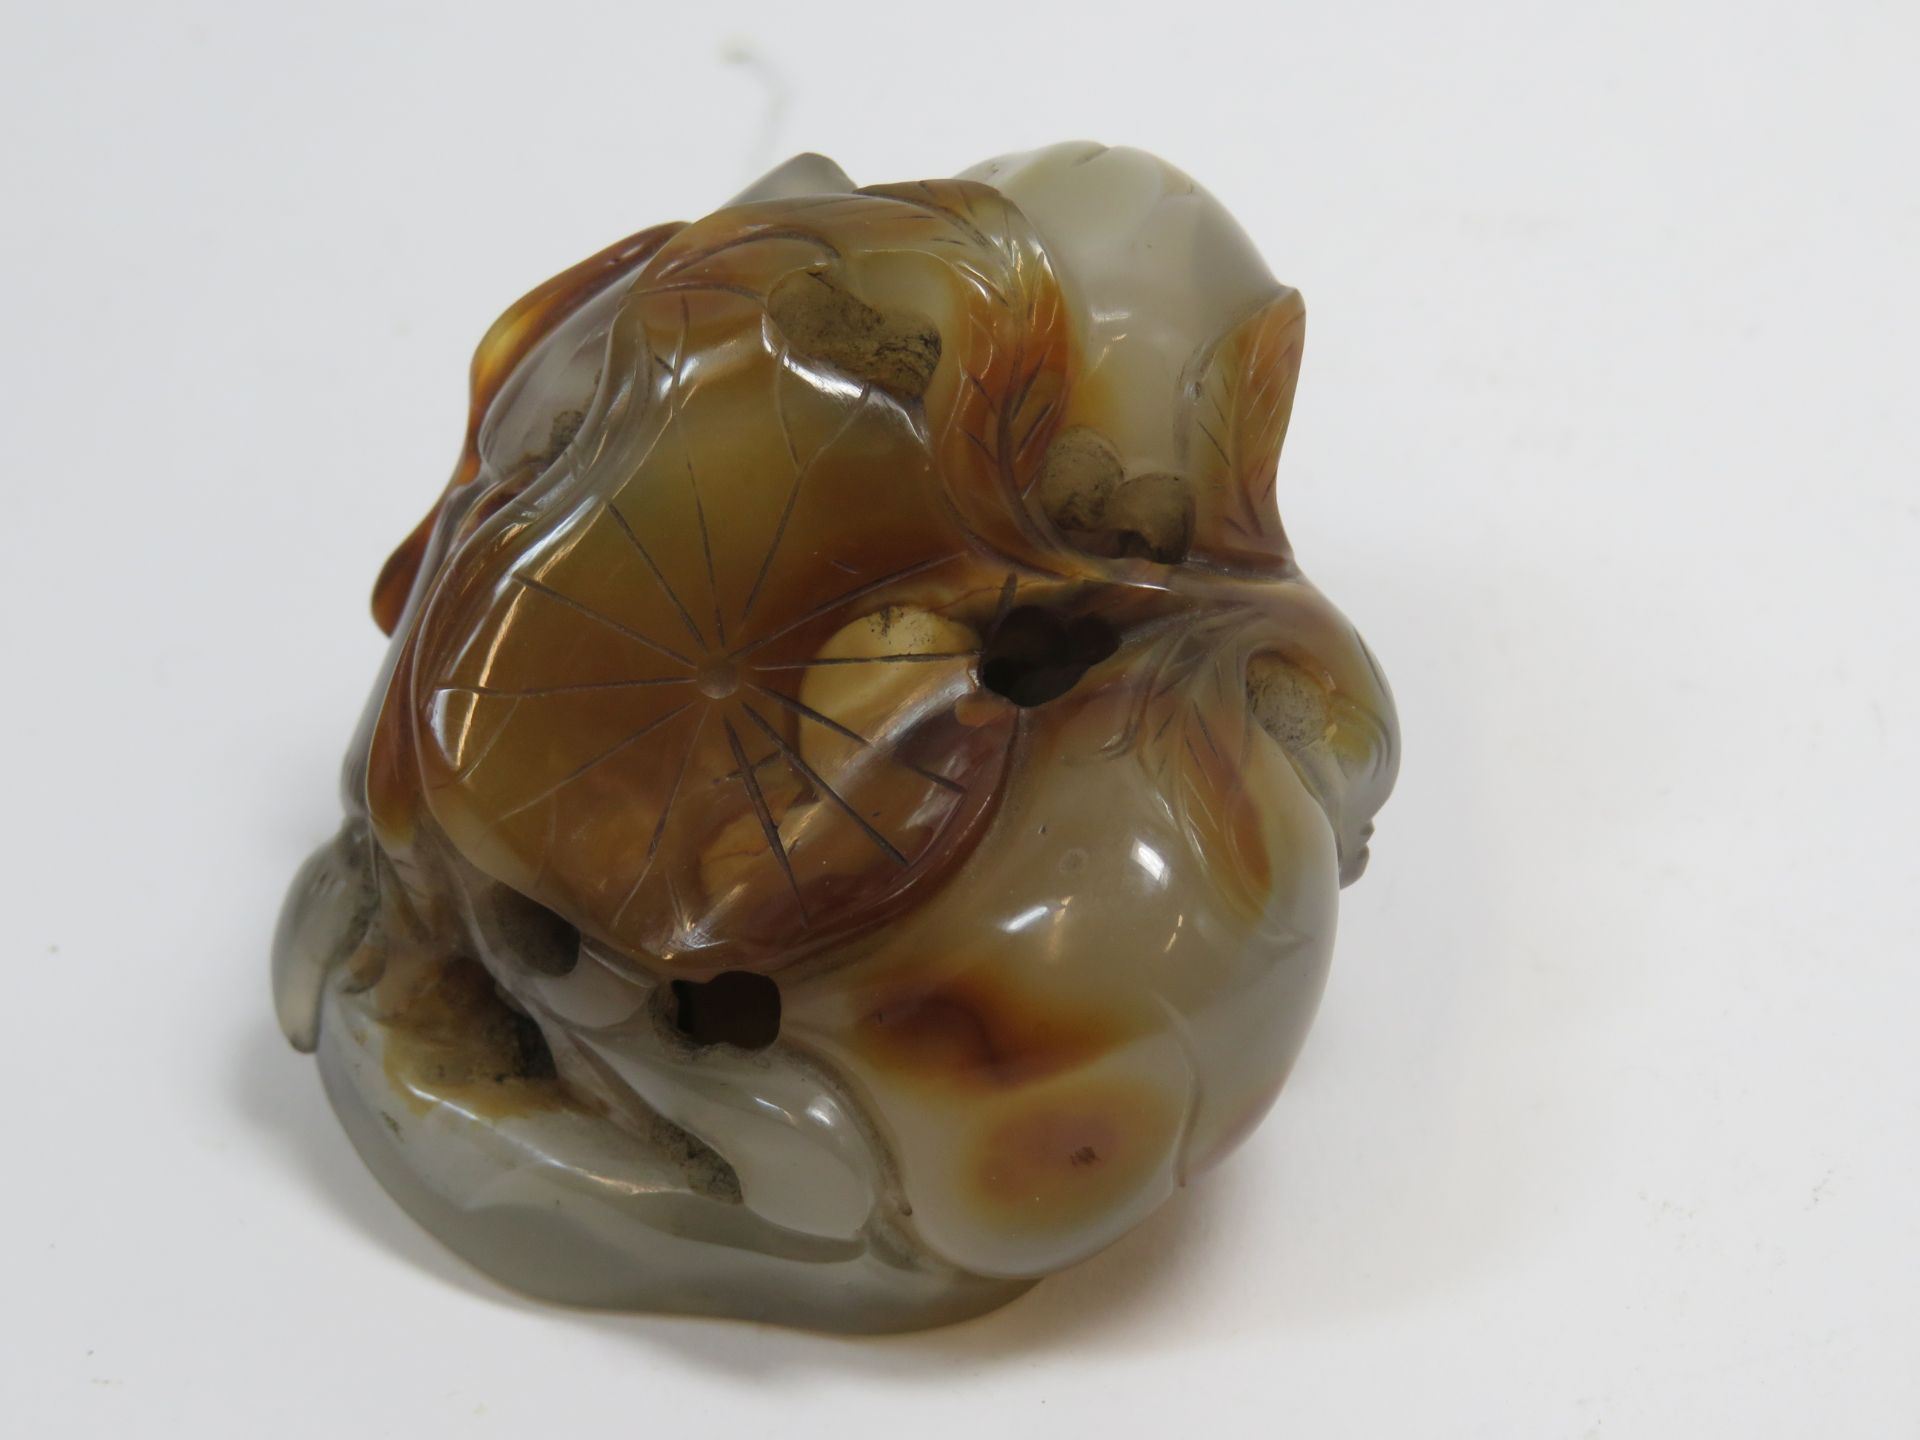 An agate carving 19th century